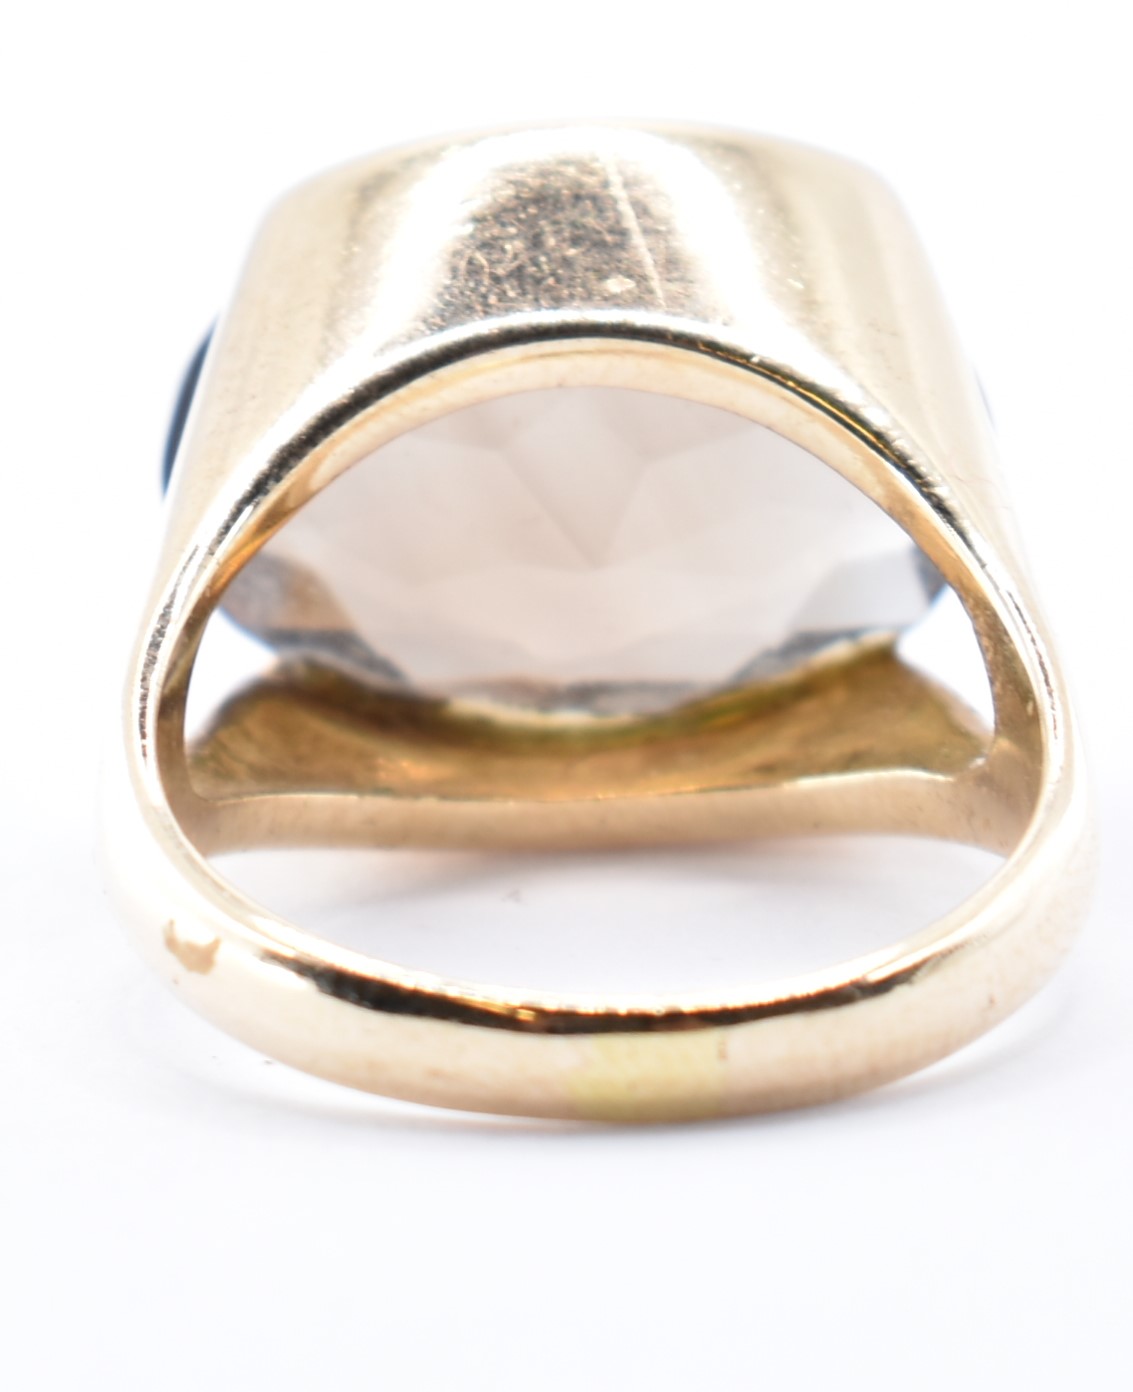 1960'S 9CT GOLD SMOKY QUARTZ COCKTAIL RING - Image 9 of 13